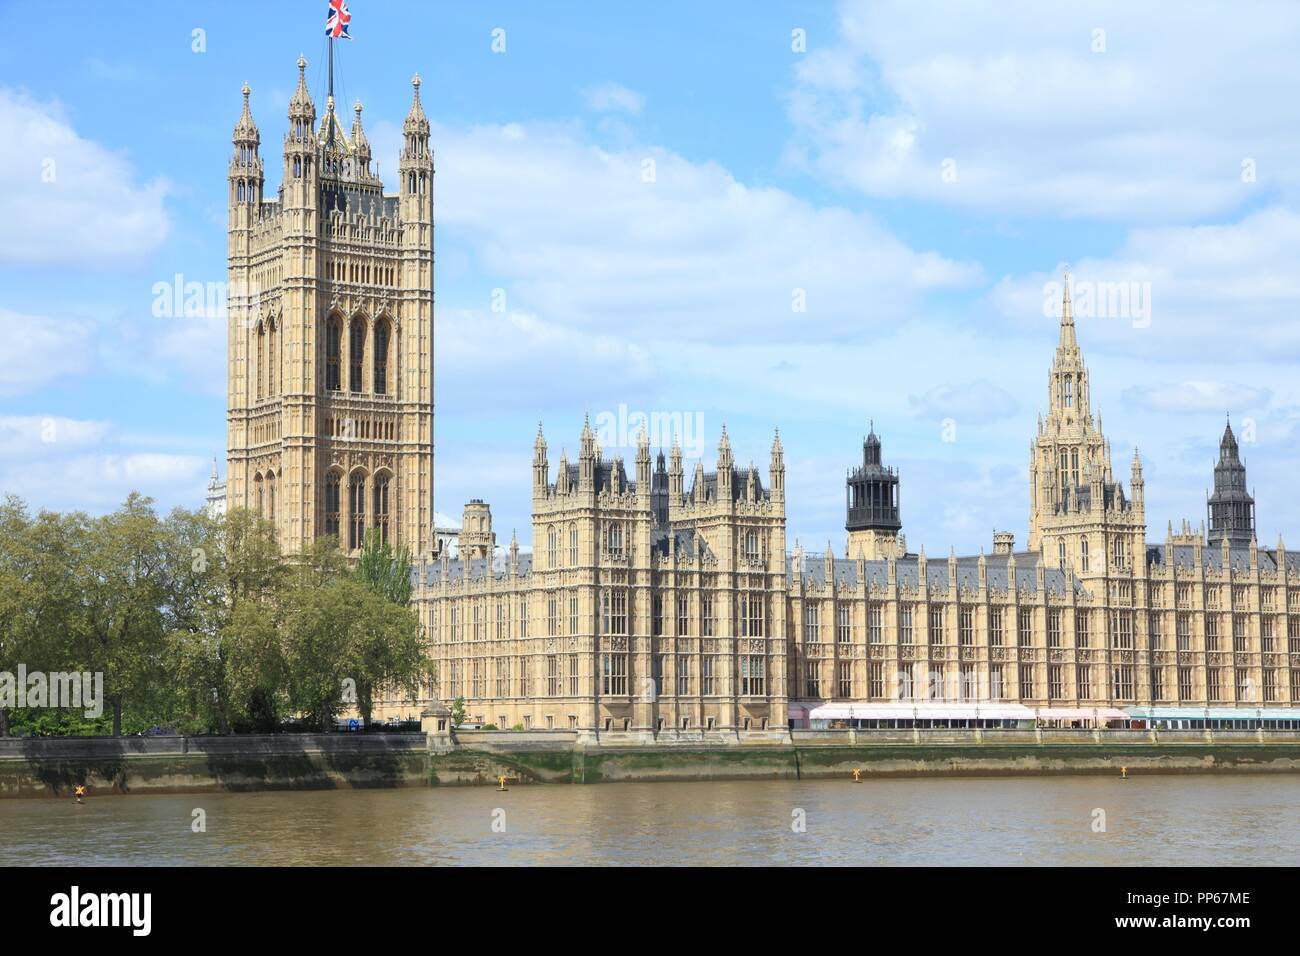 London, United Kingdom - Palace of Westminster (Houses of Parliament). UNESCO World Heritage Site. Stock Photo